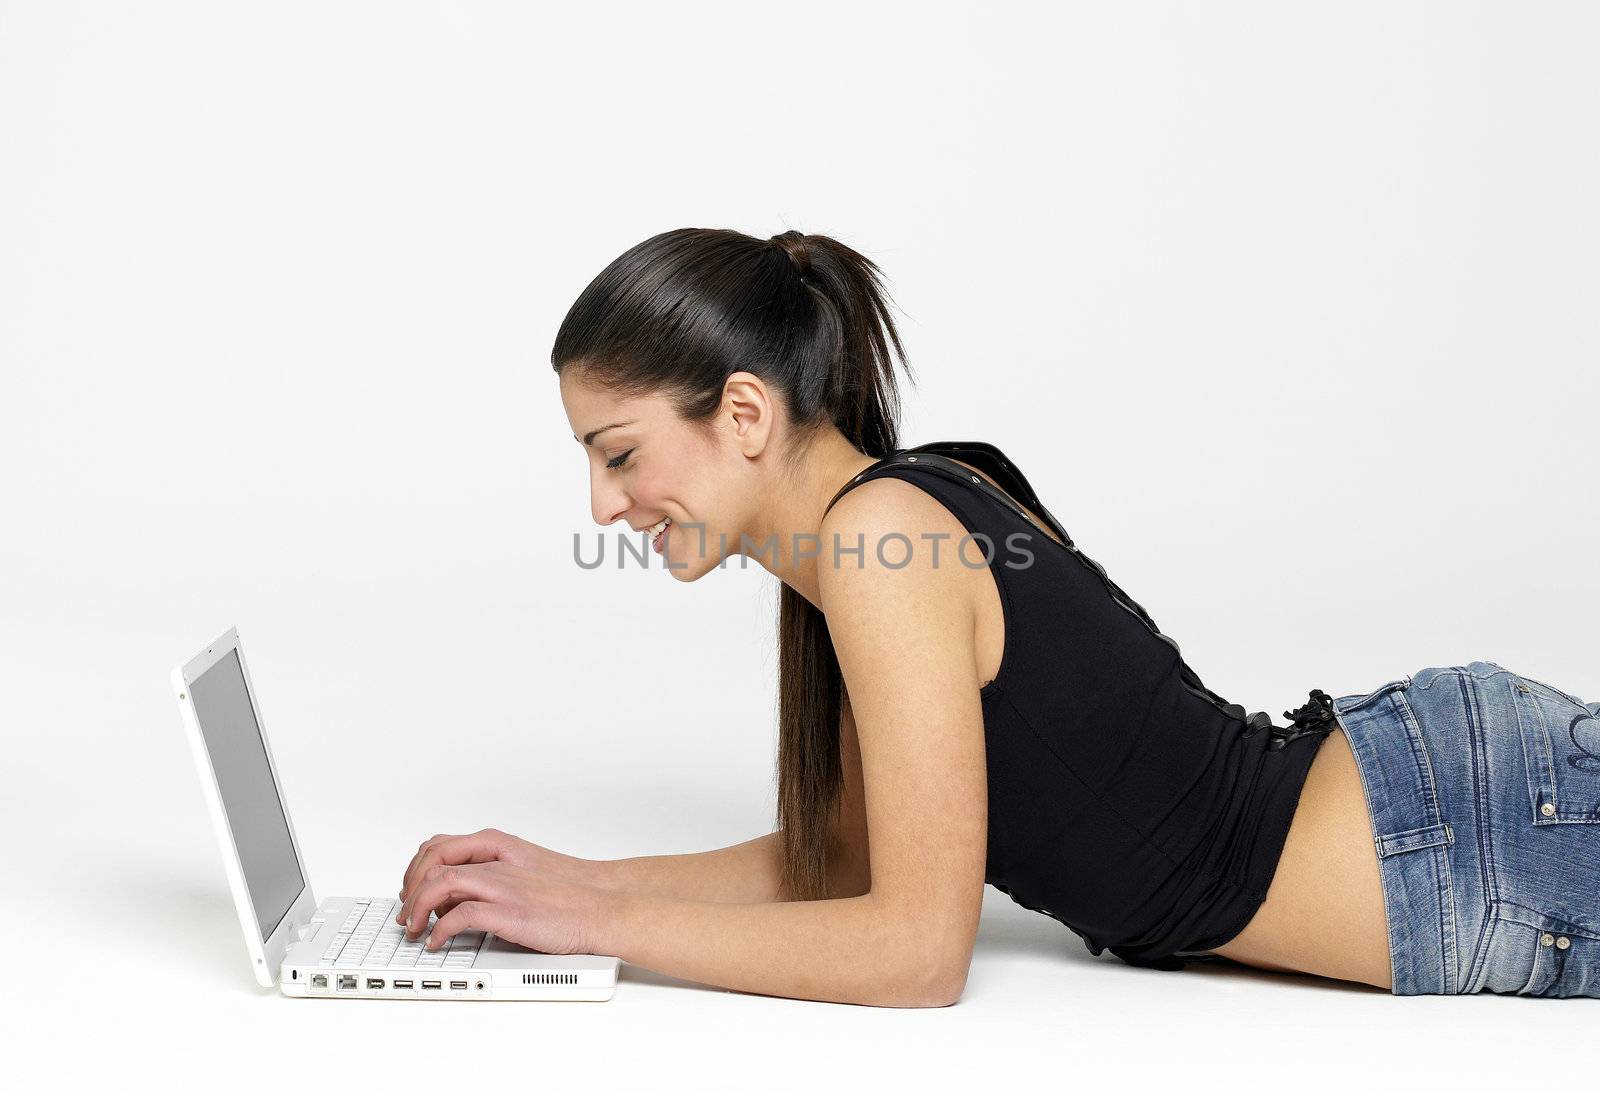 Pretty young girl lying on floor with laptop